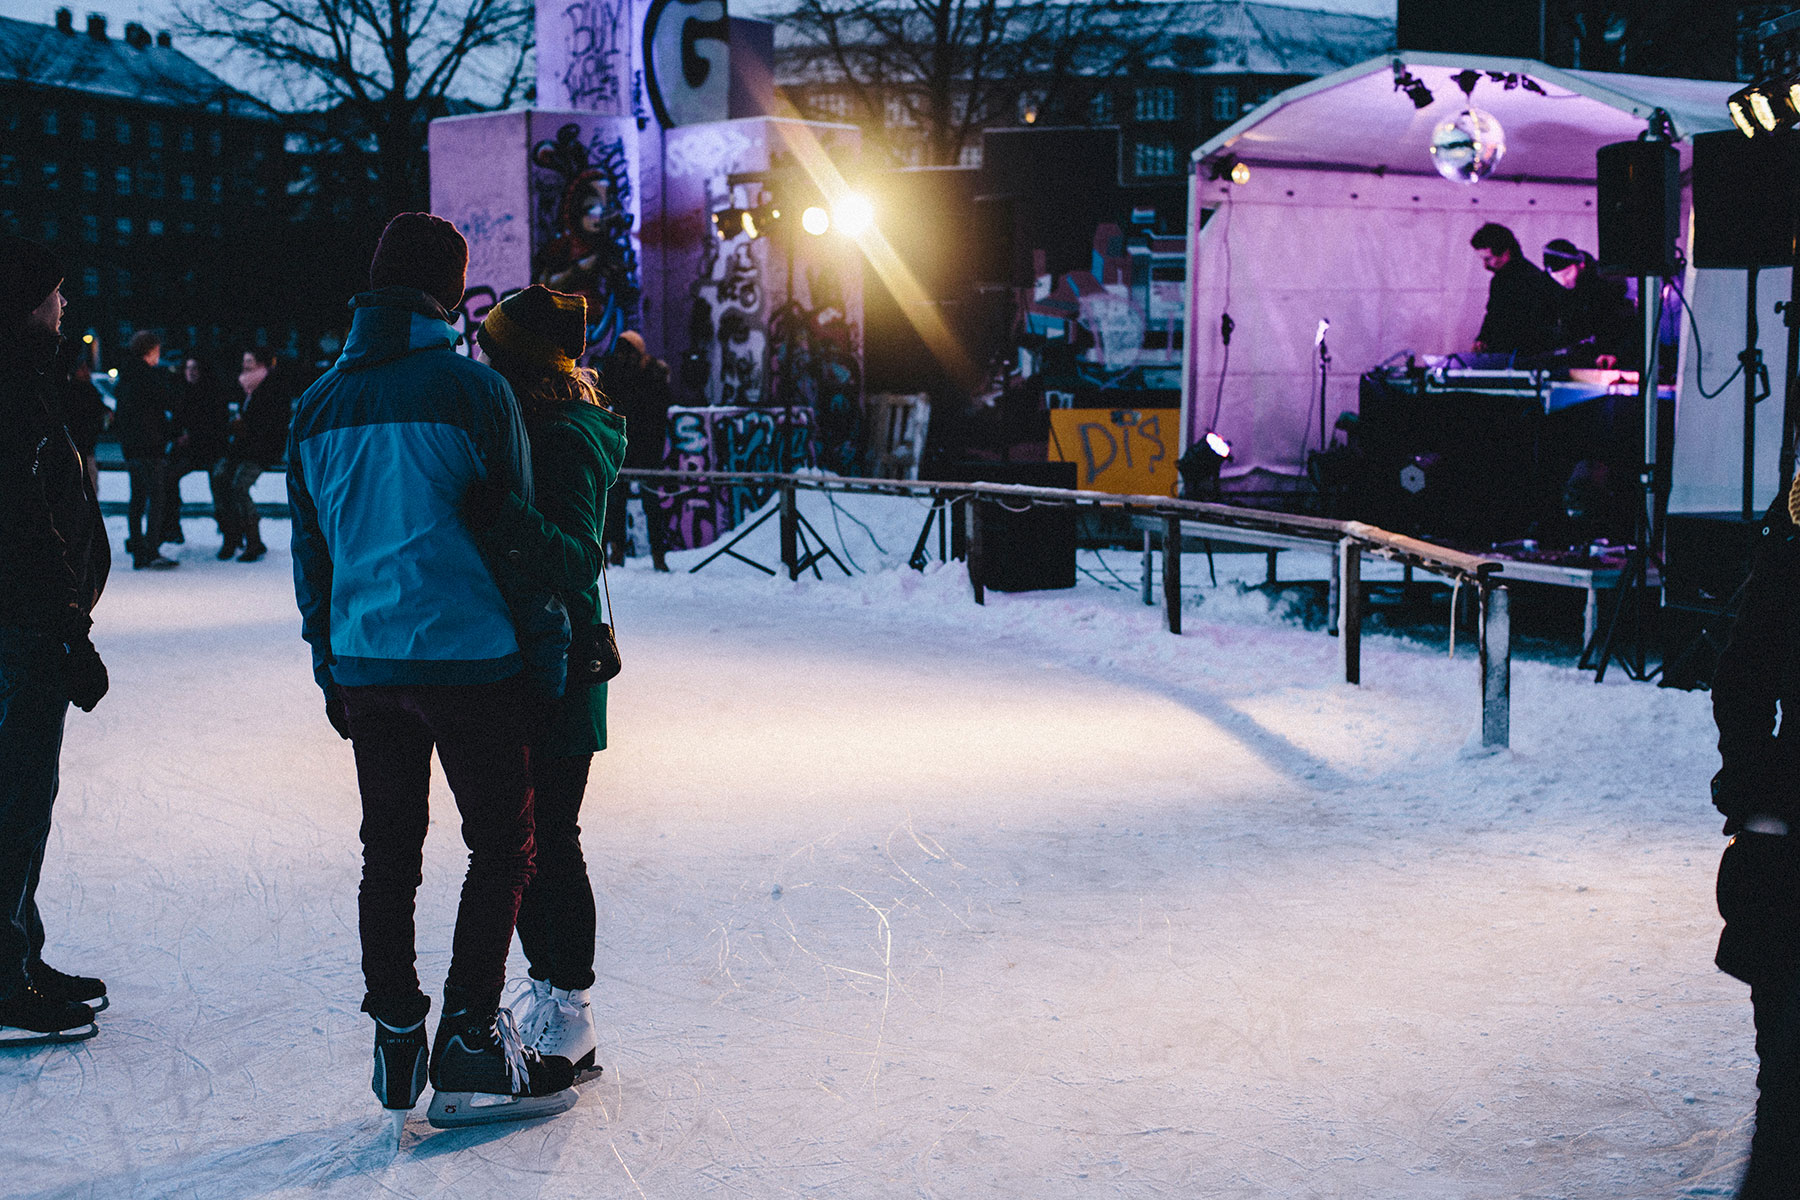 Picture from FROST festival 2013. Pictures from Who Made Who's liveshow dj-set with instruments playing at Toftegårds plads skøjtebane (ice skatting course)